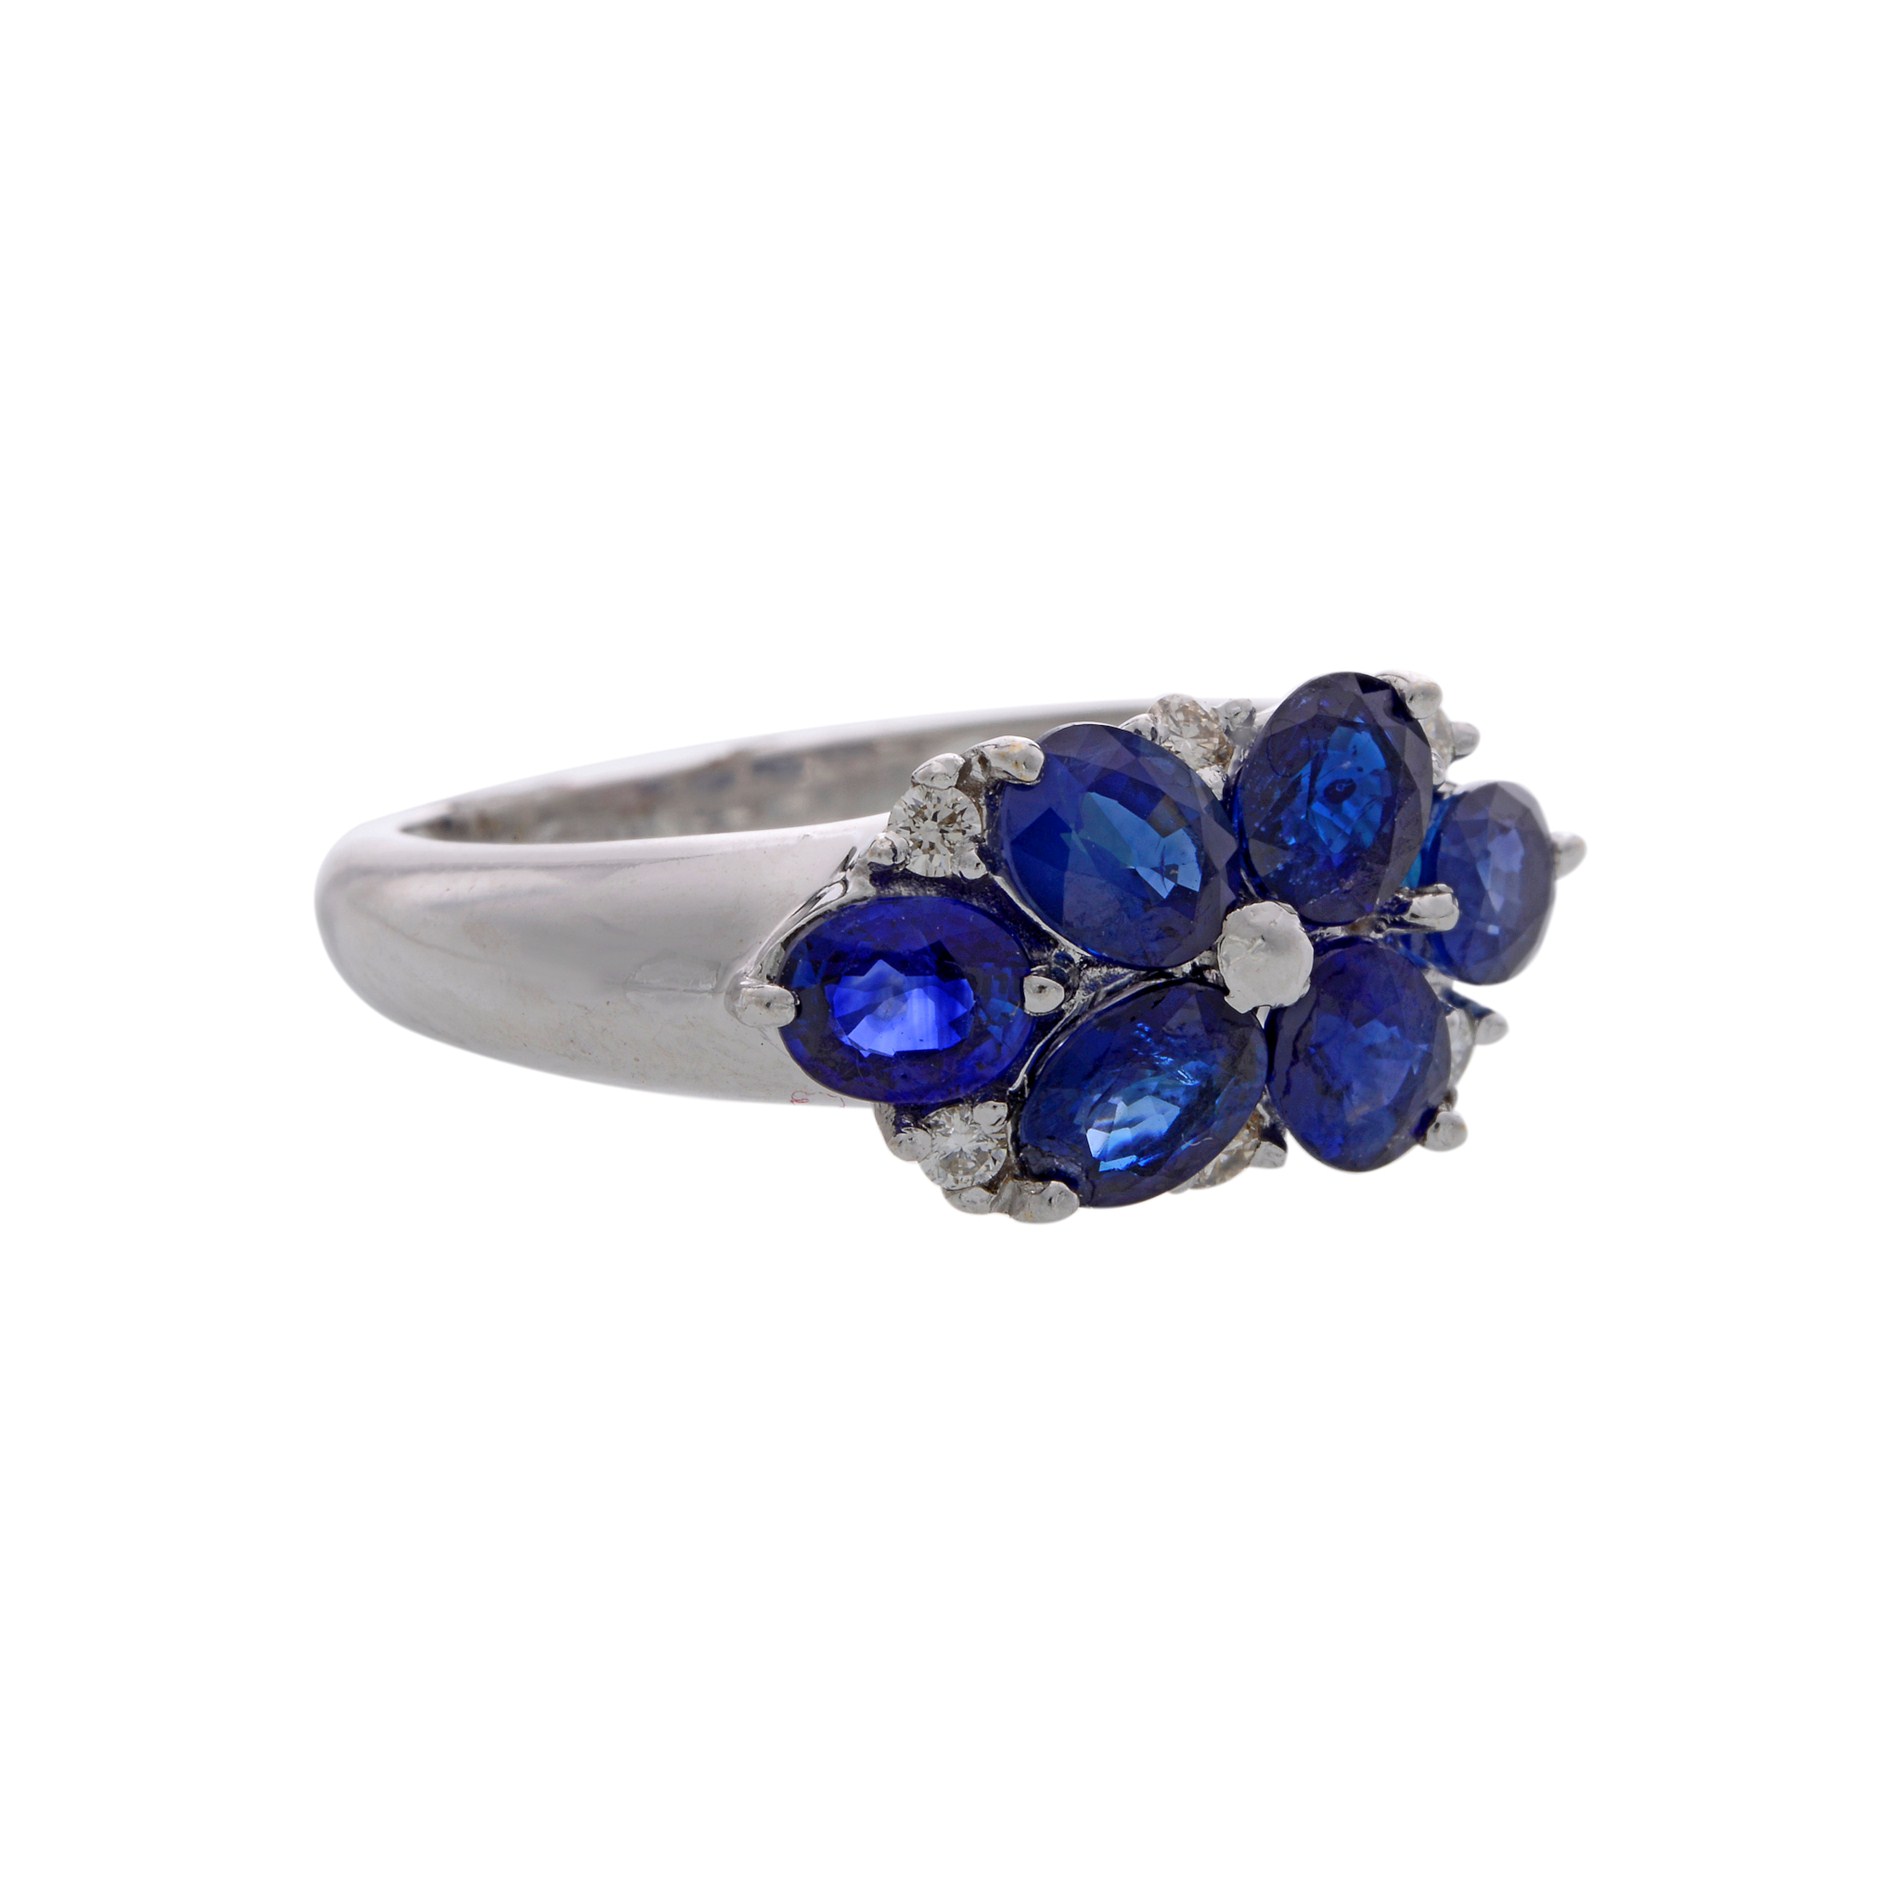 Buy Blue Sapphire & Diamonds Finger Ring with 2 stones online